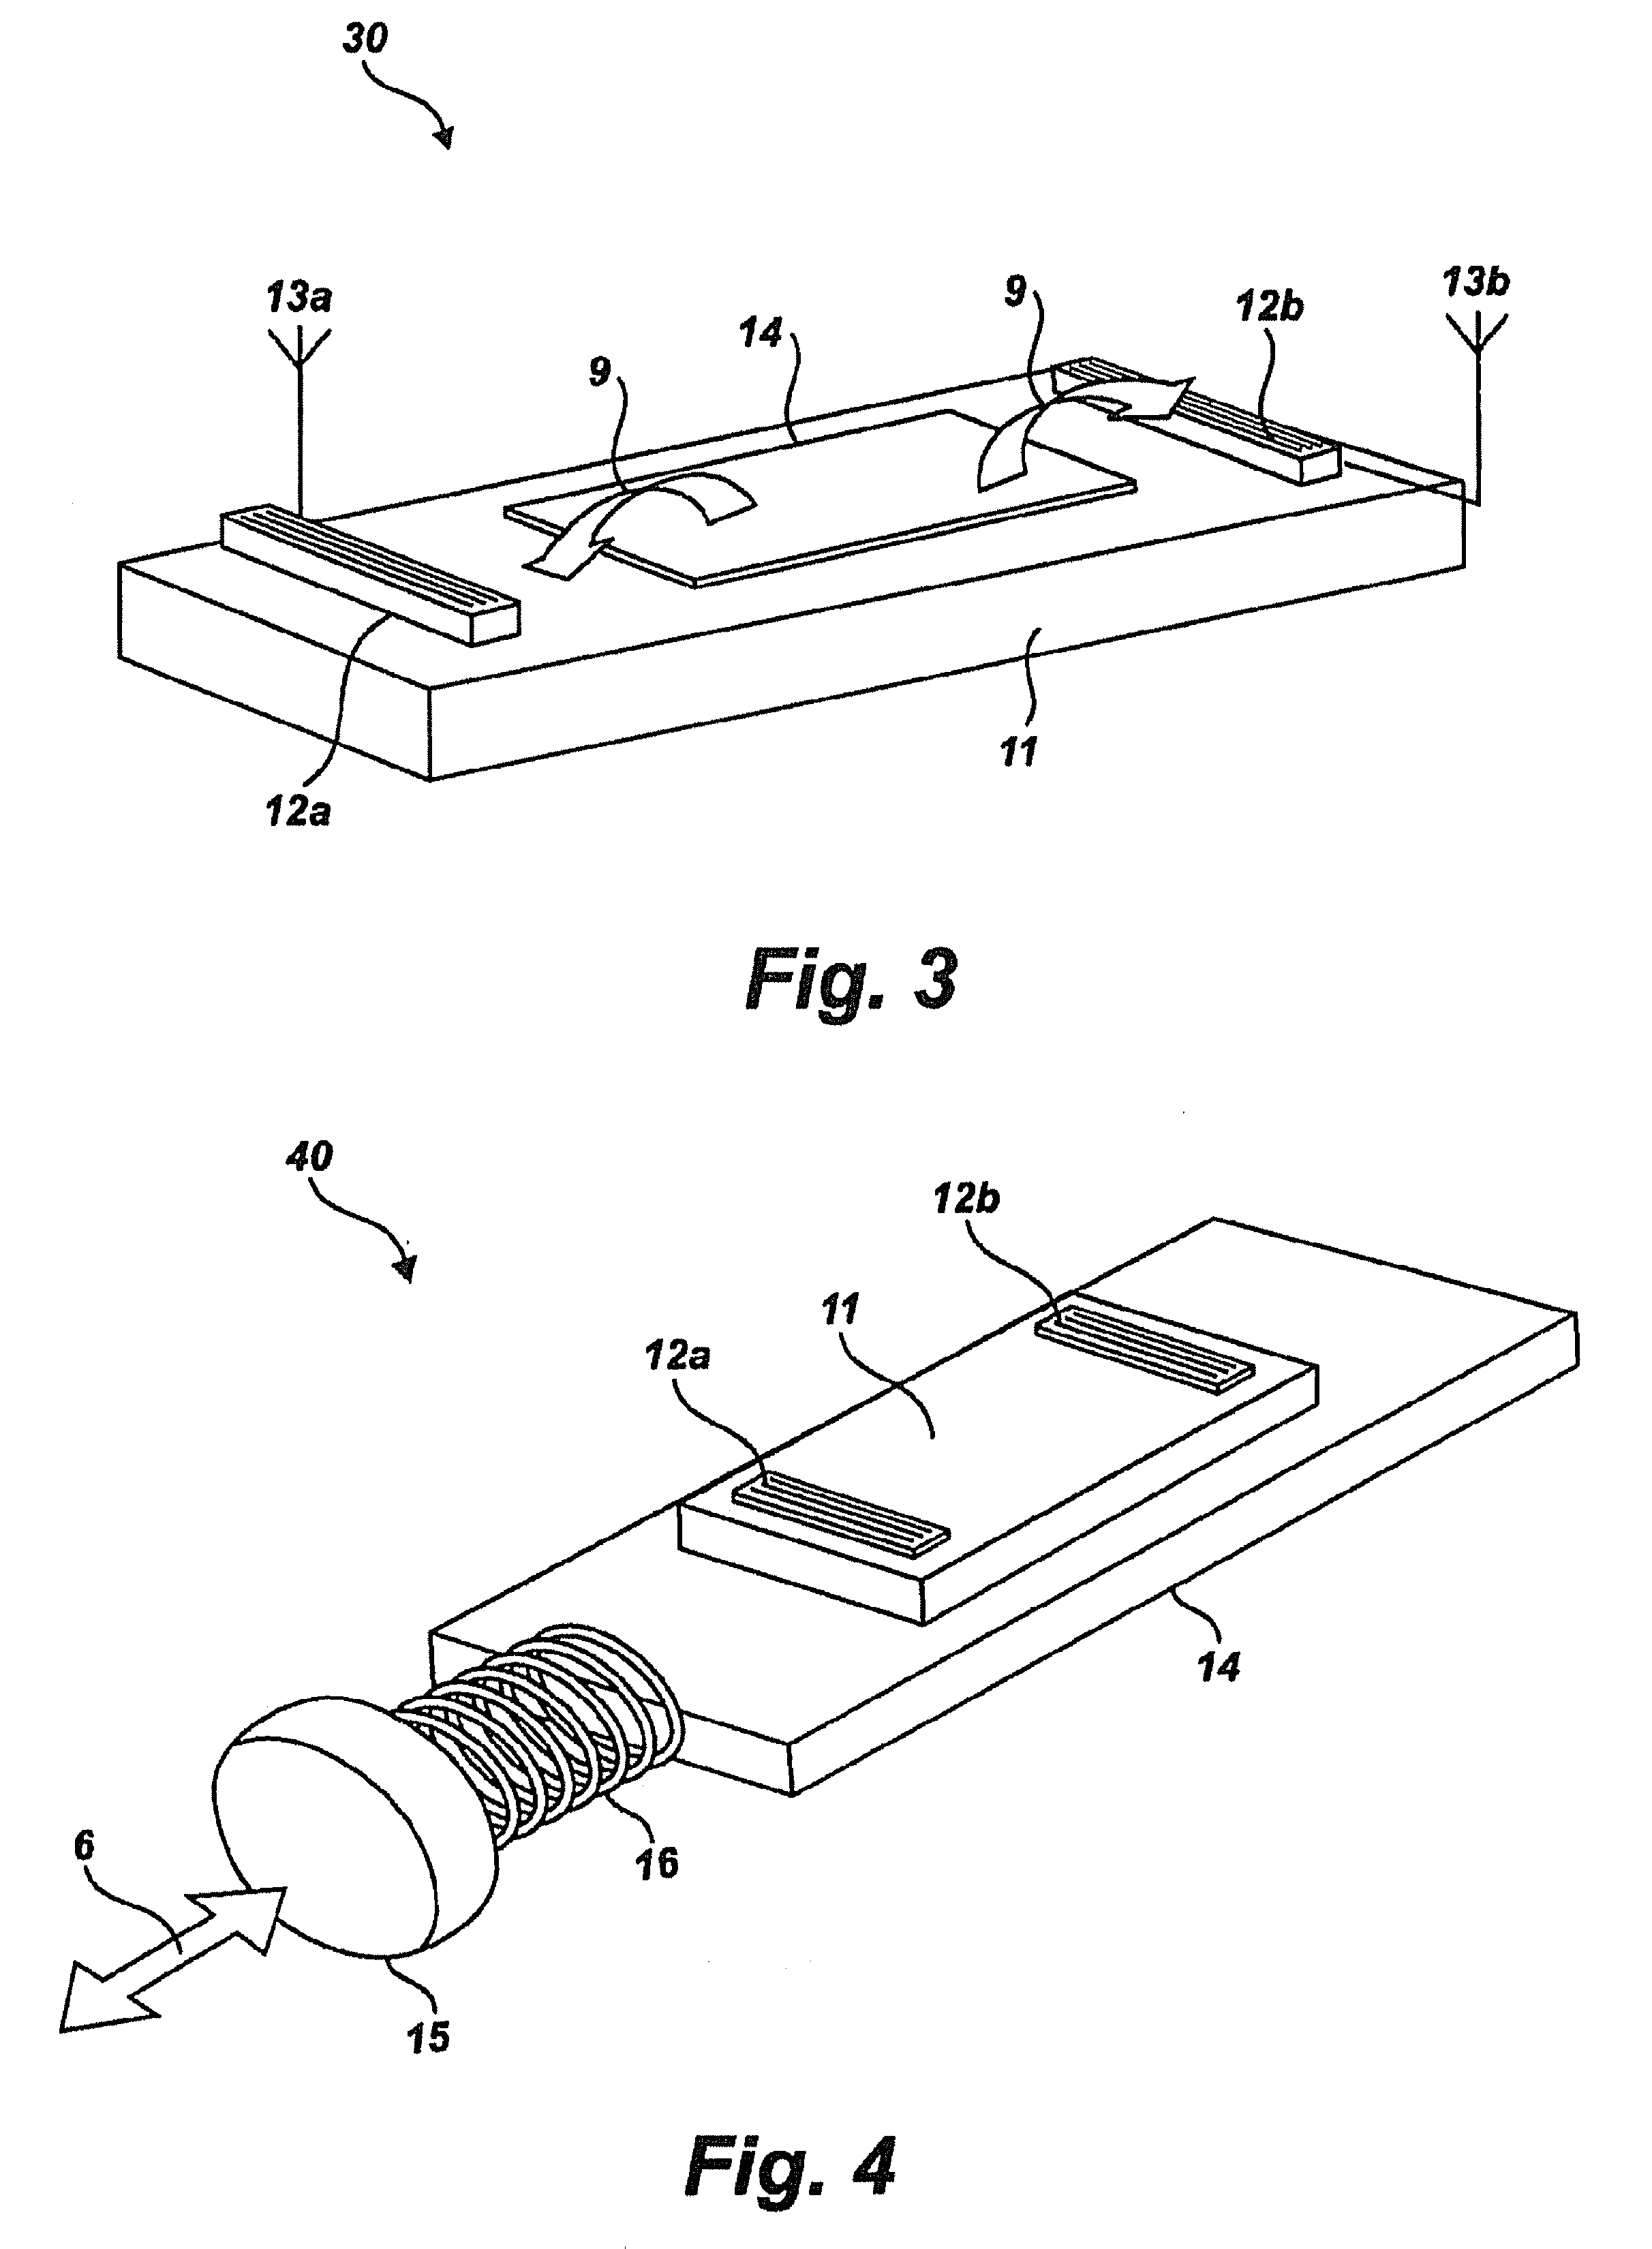 Wireless surface acoustic wave-based proximity sensor, sensing system and method